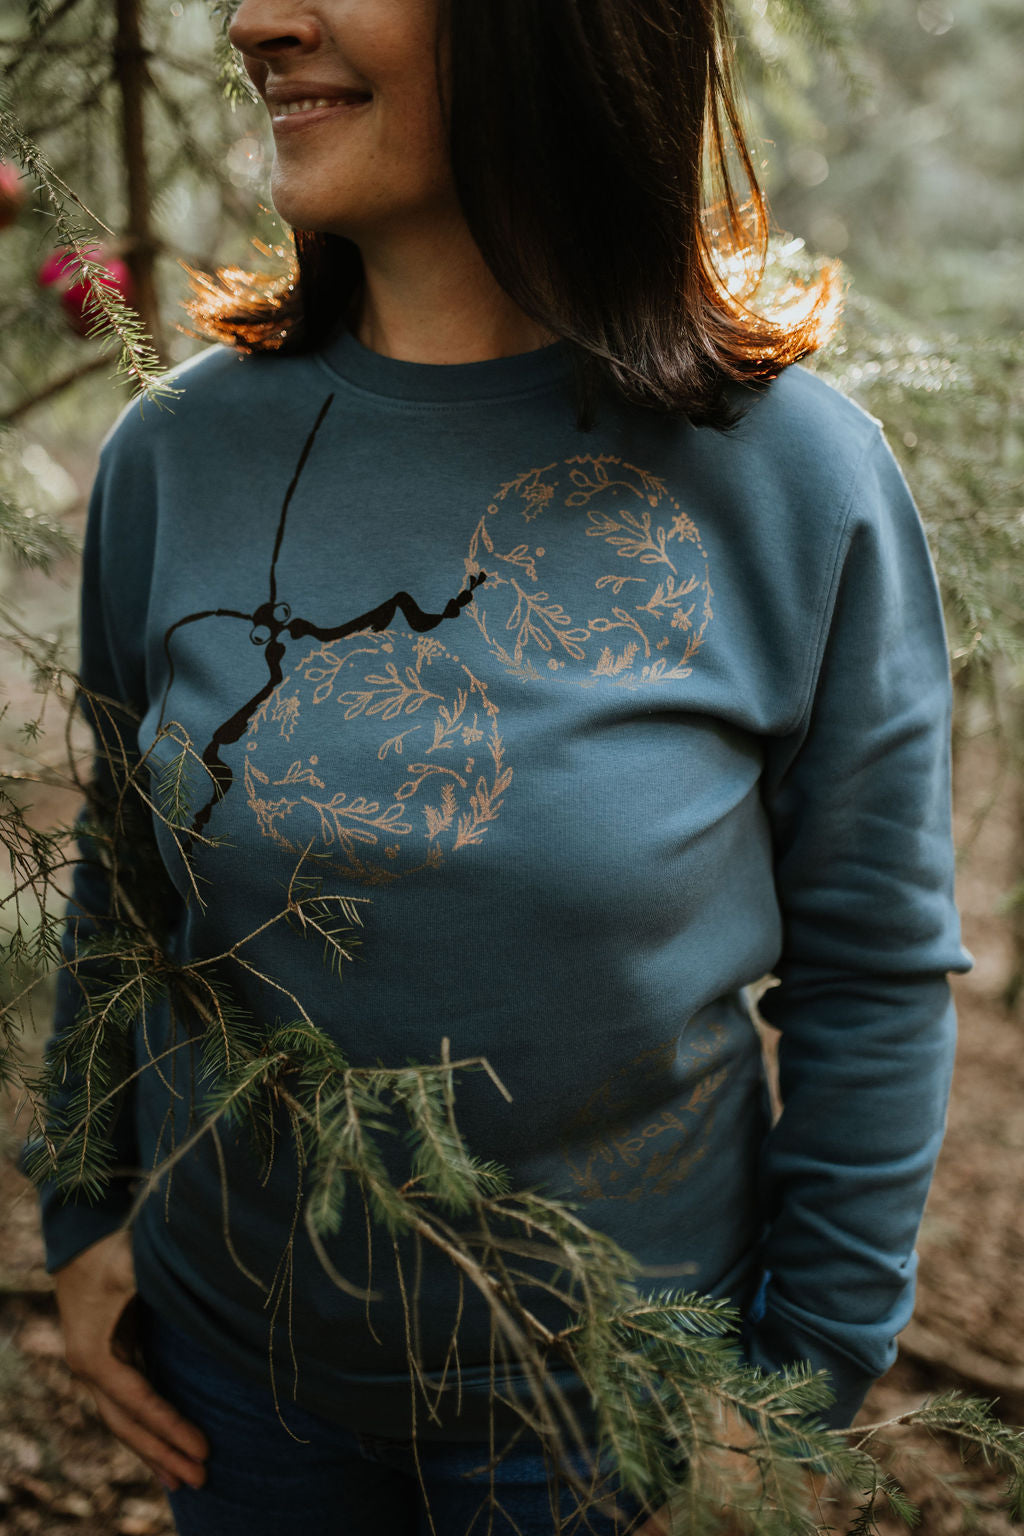 The iconic crew neck sweater with copper bubbles with a bug